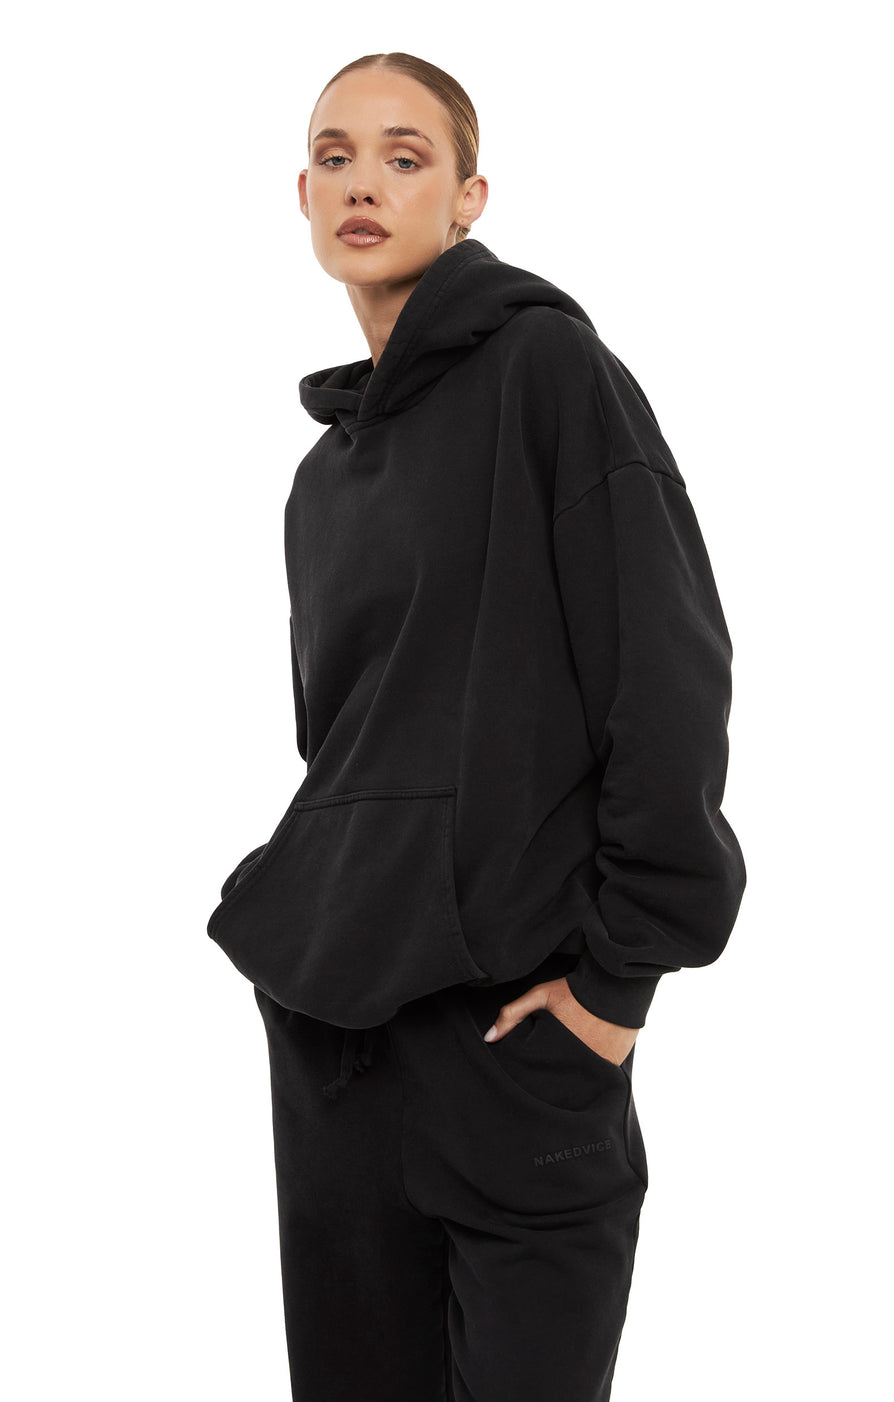 THE UNISEX WASHED BLACK HOODIE | model